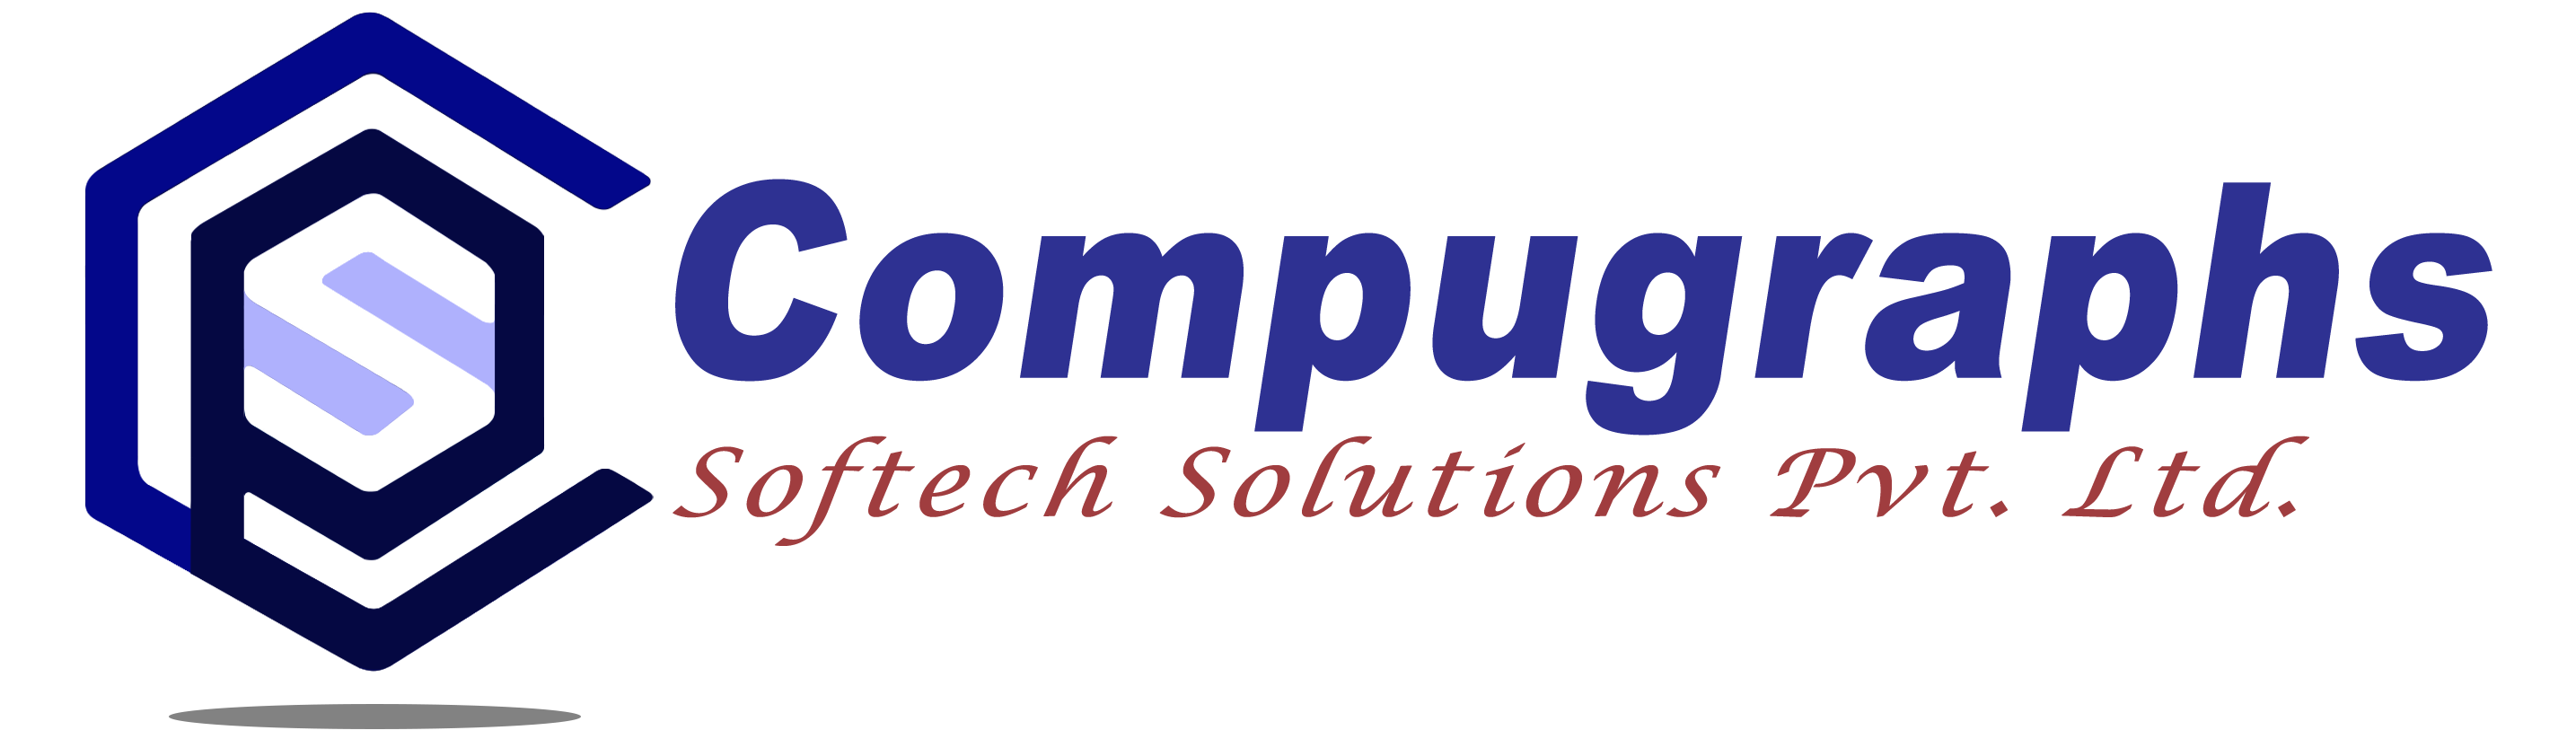 Compugraphs Softech Solutions